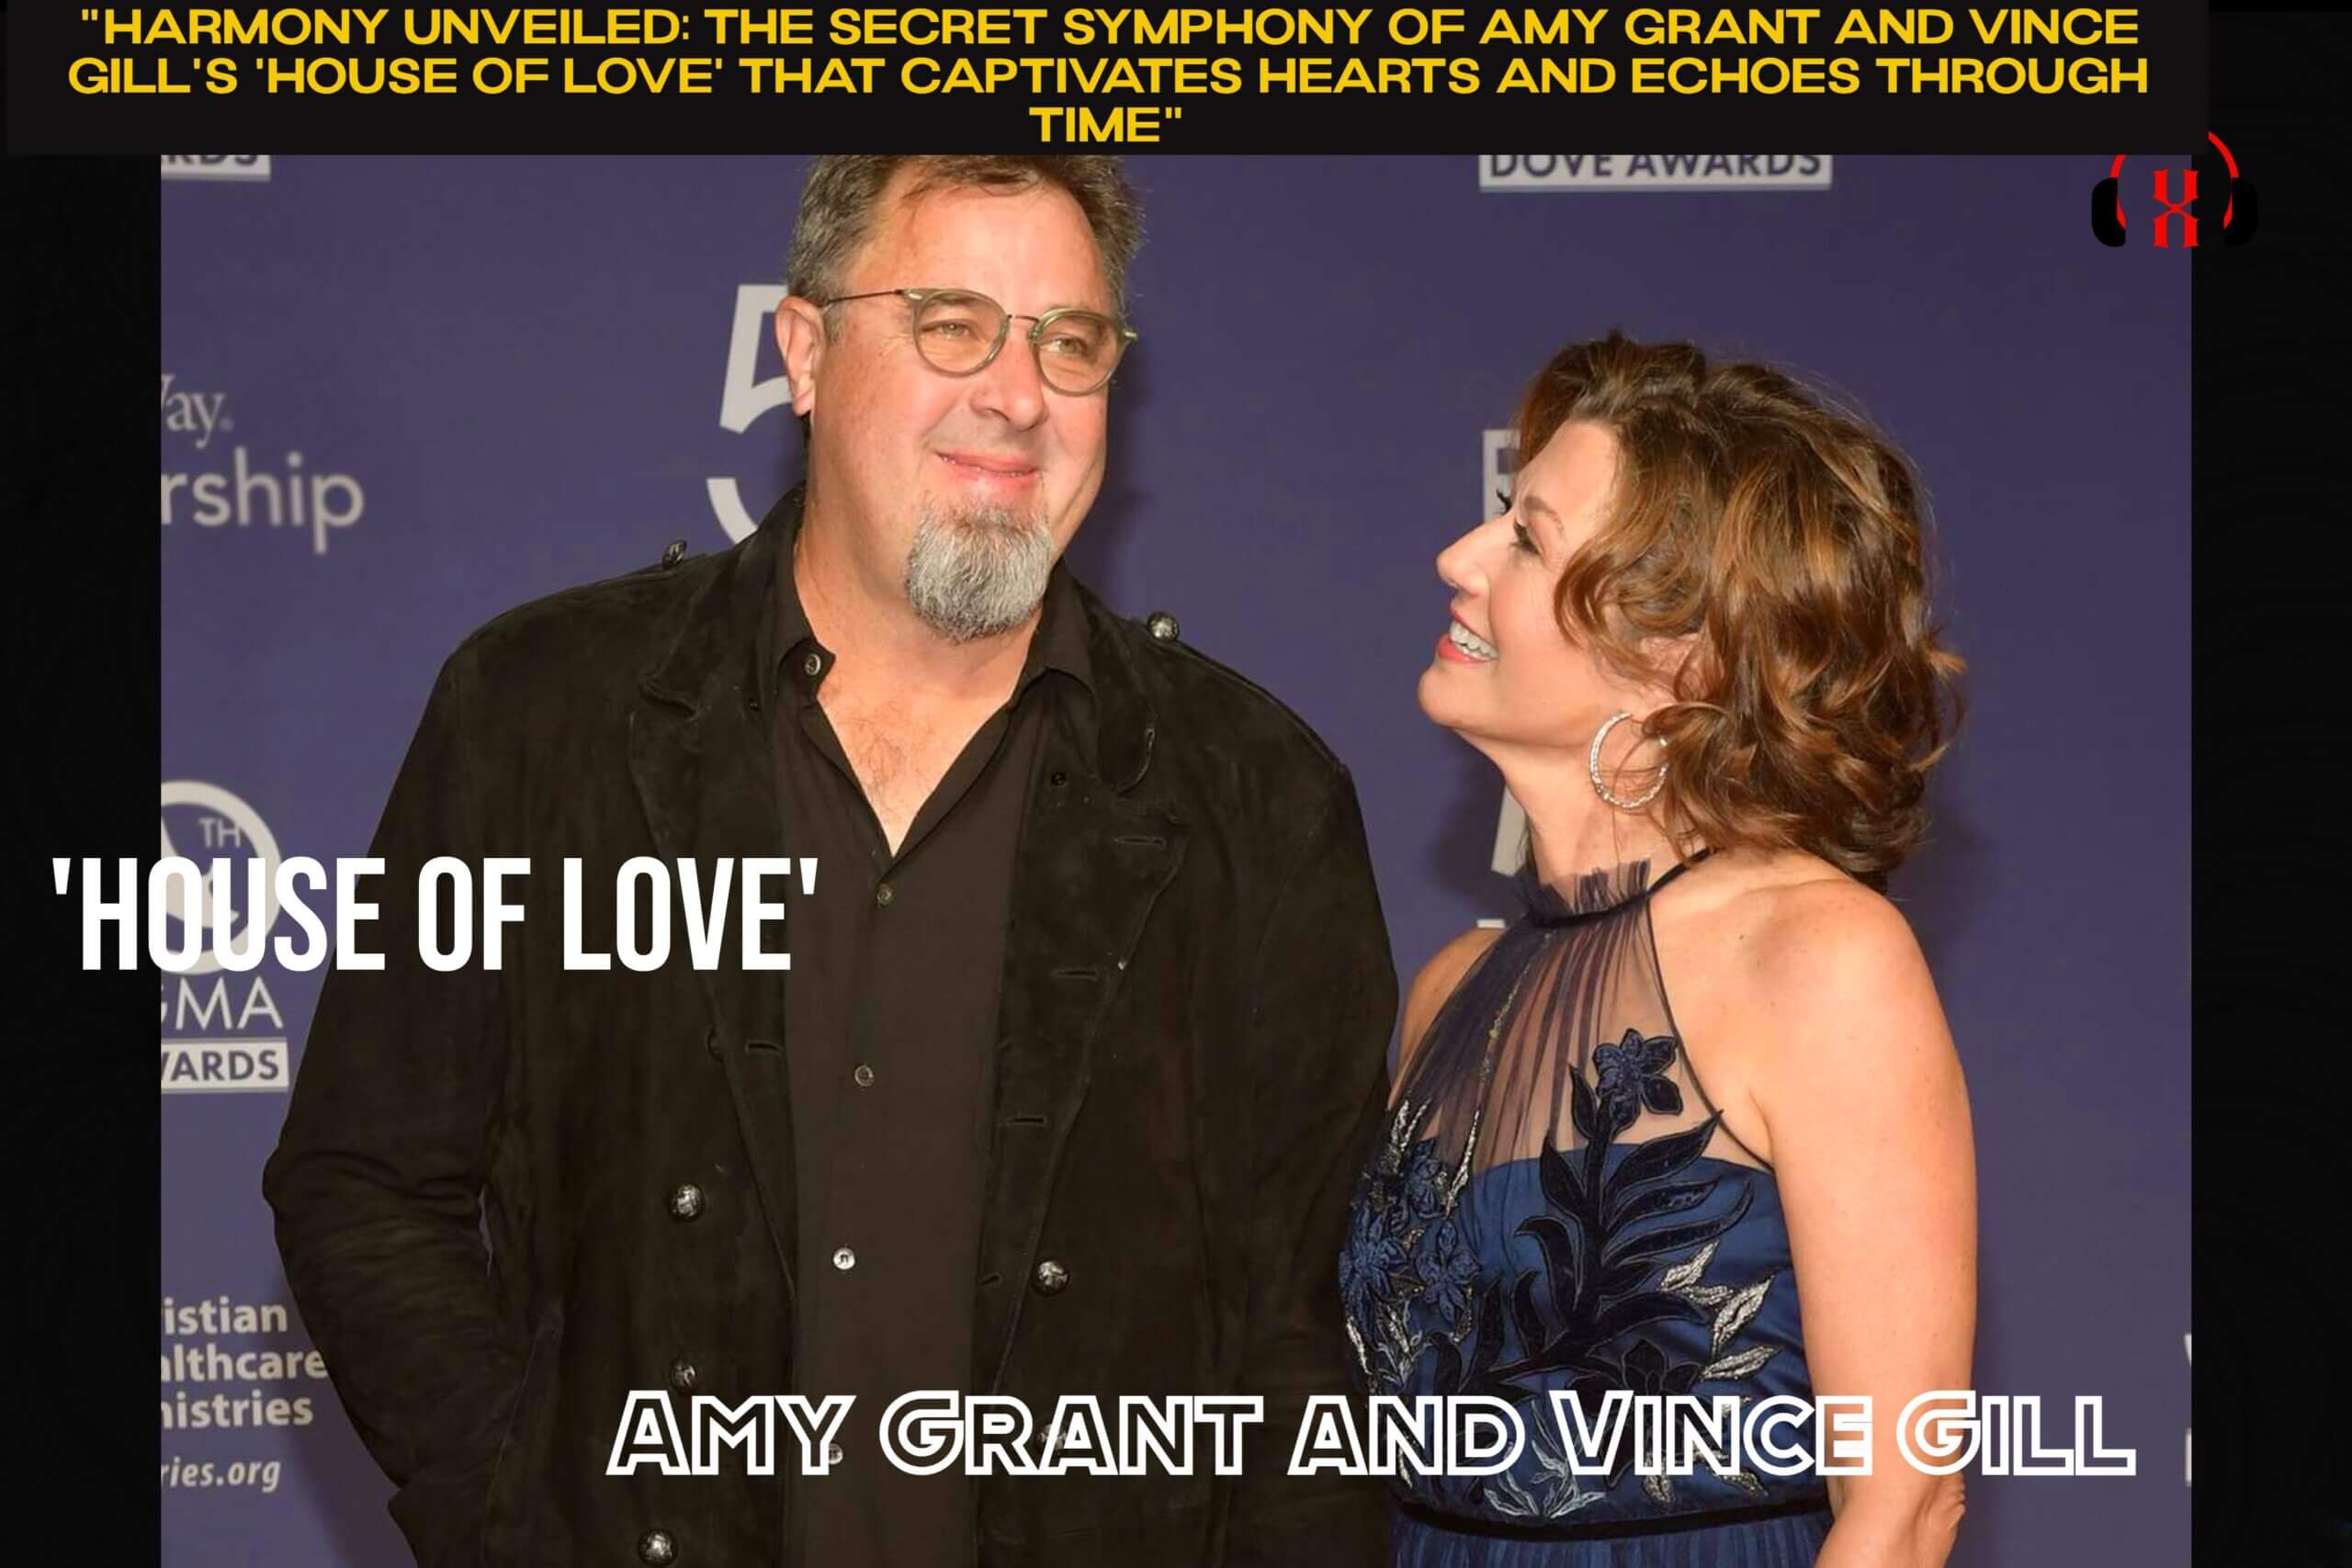 “Harmony Unveiled: The Secret Symphony of Amy Grant and Vince Gill’s ‘House of Love’ That Captivates Hearts and Echoes Through Time”